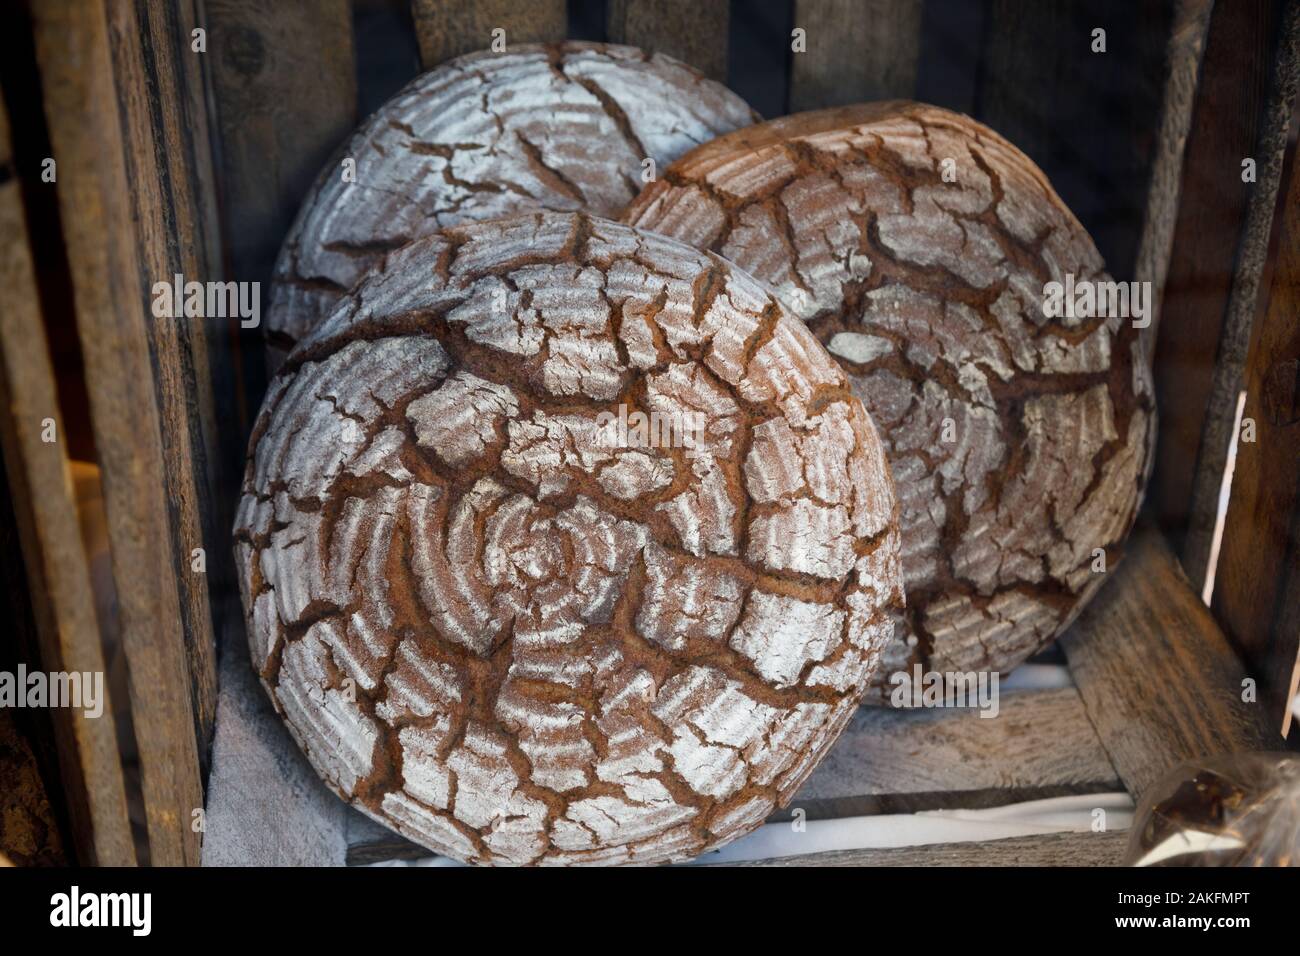 Freshly baked traditional German sourdough rye bread round loafs for sale at market in Rothenburg ob der Tauber, Bavaria, Germany, Europe Stock Photo